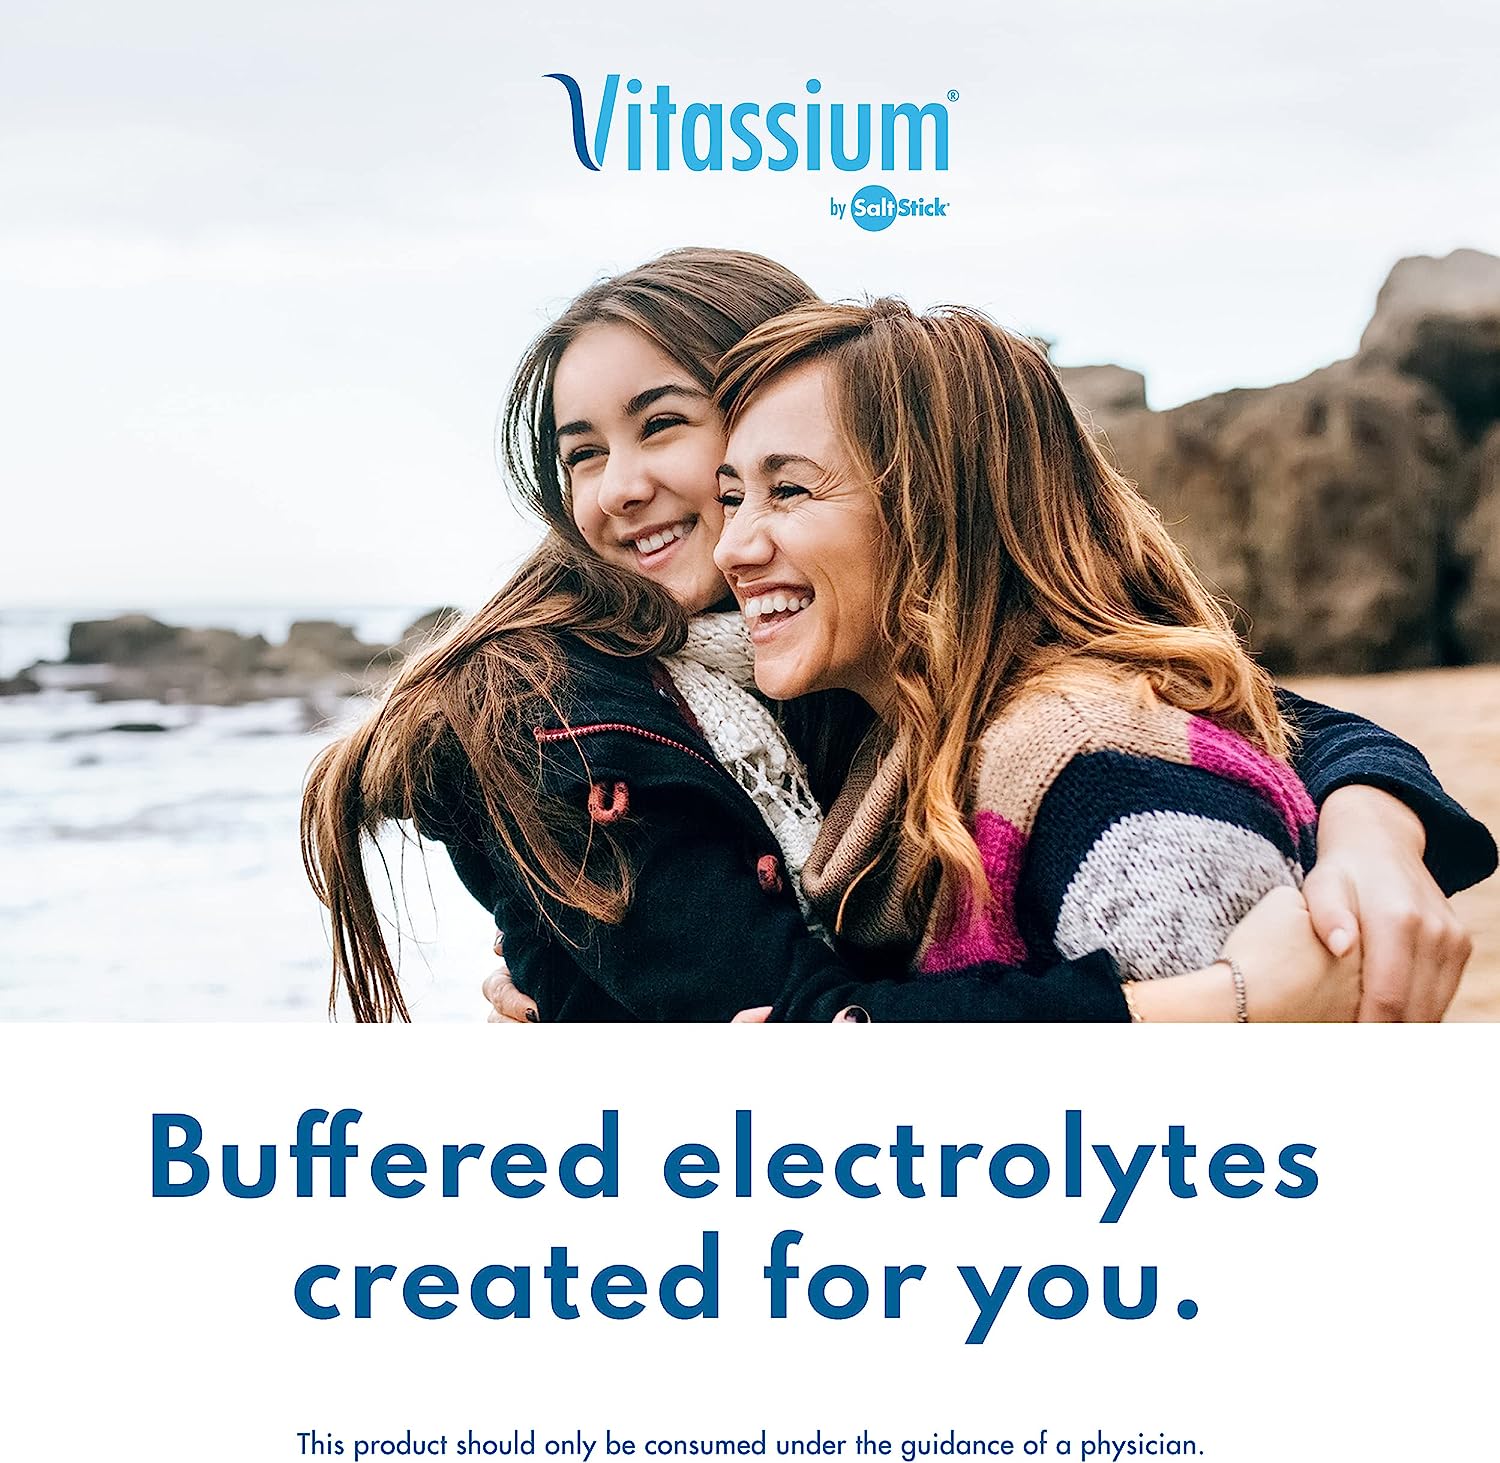 Buffered electrolytes created for you